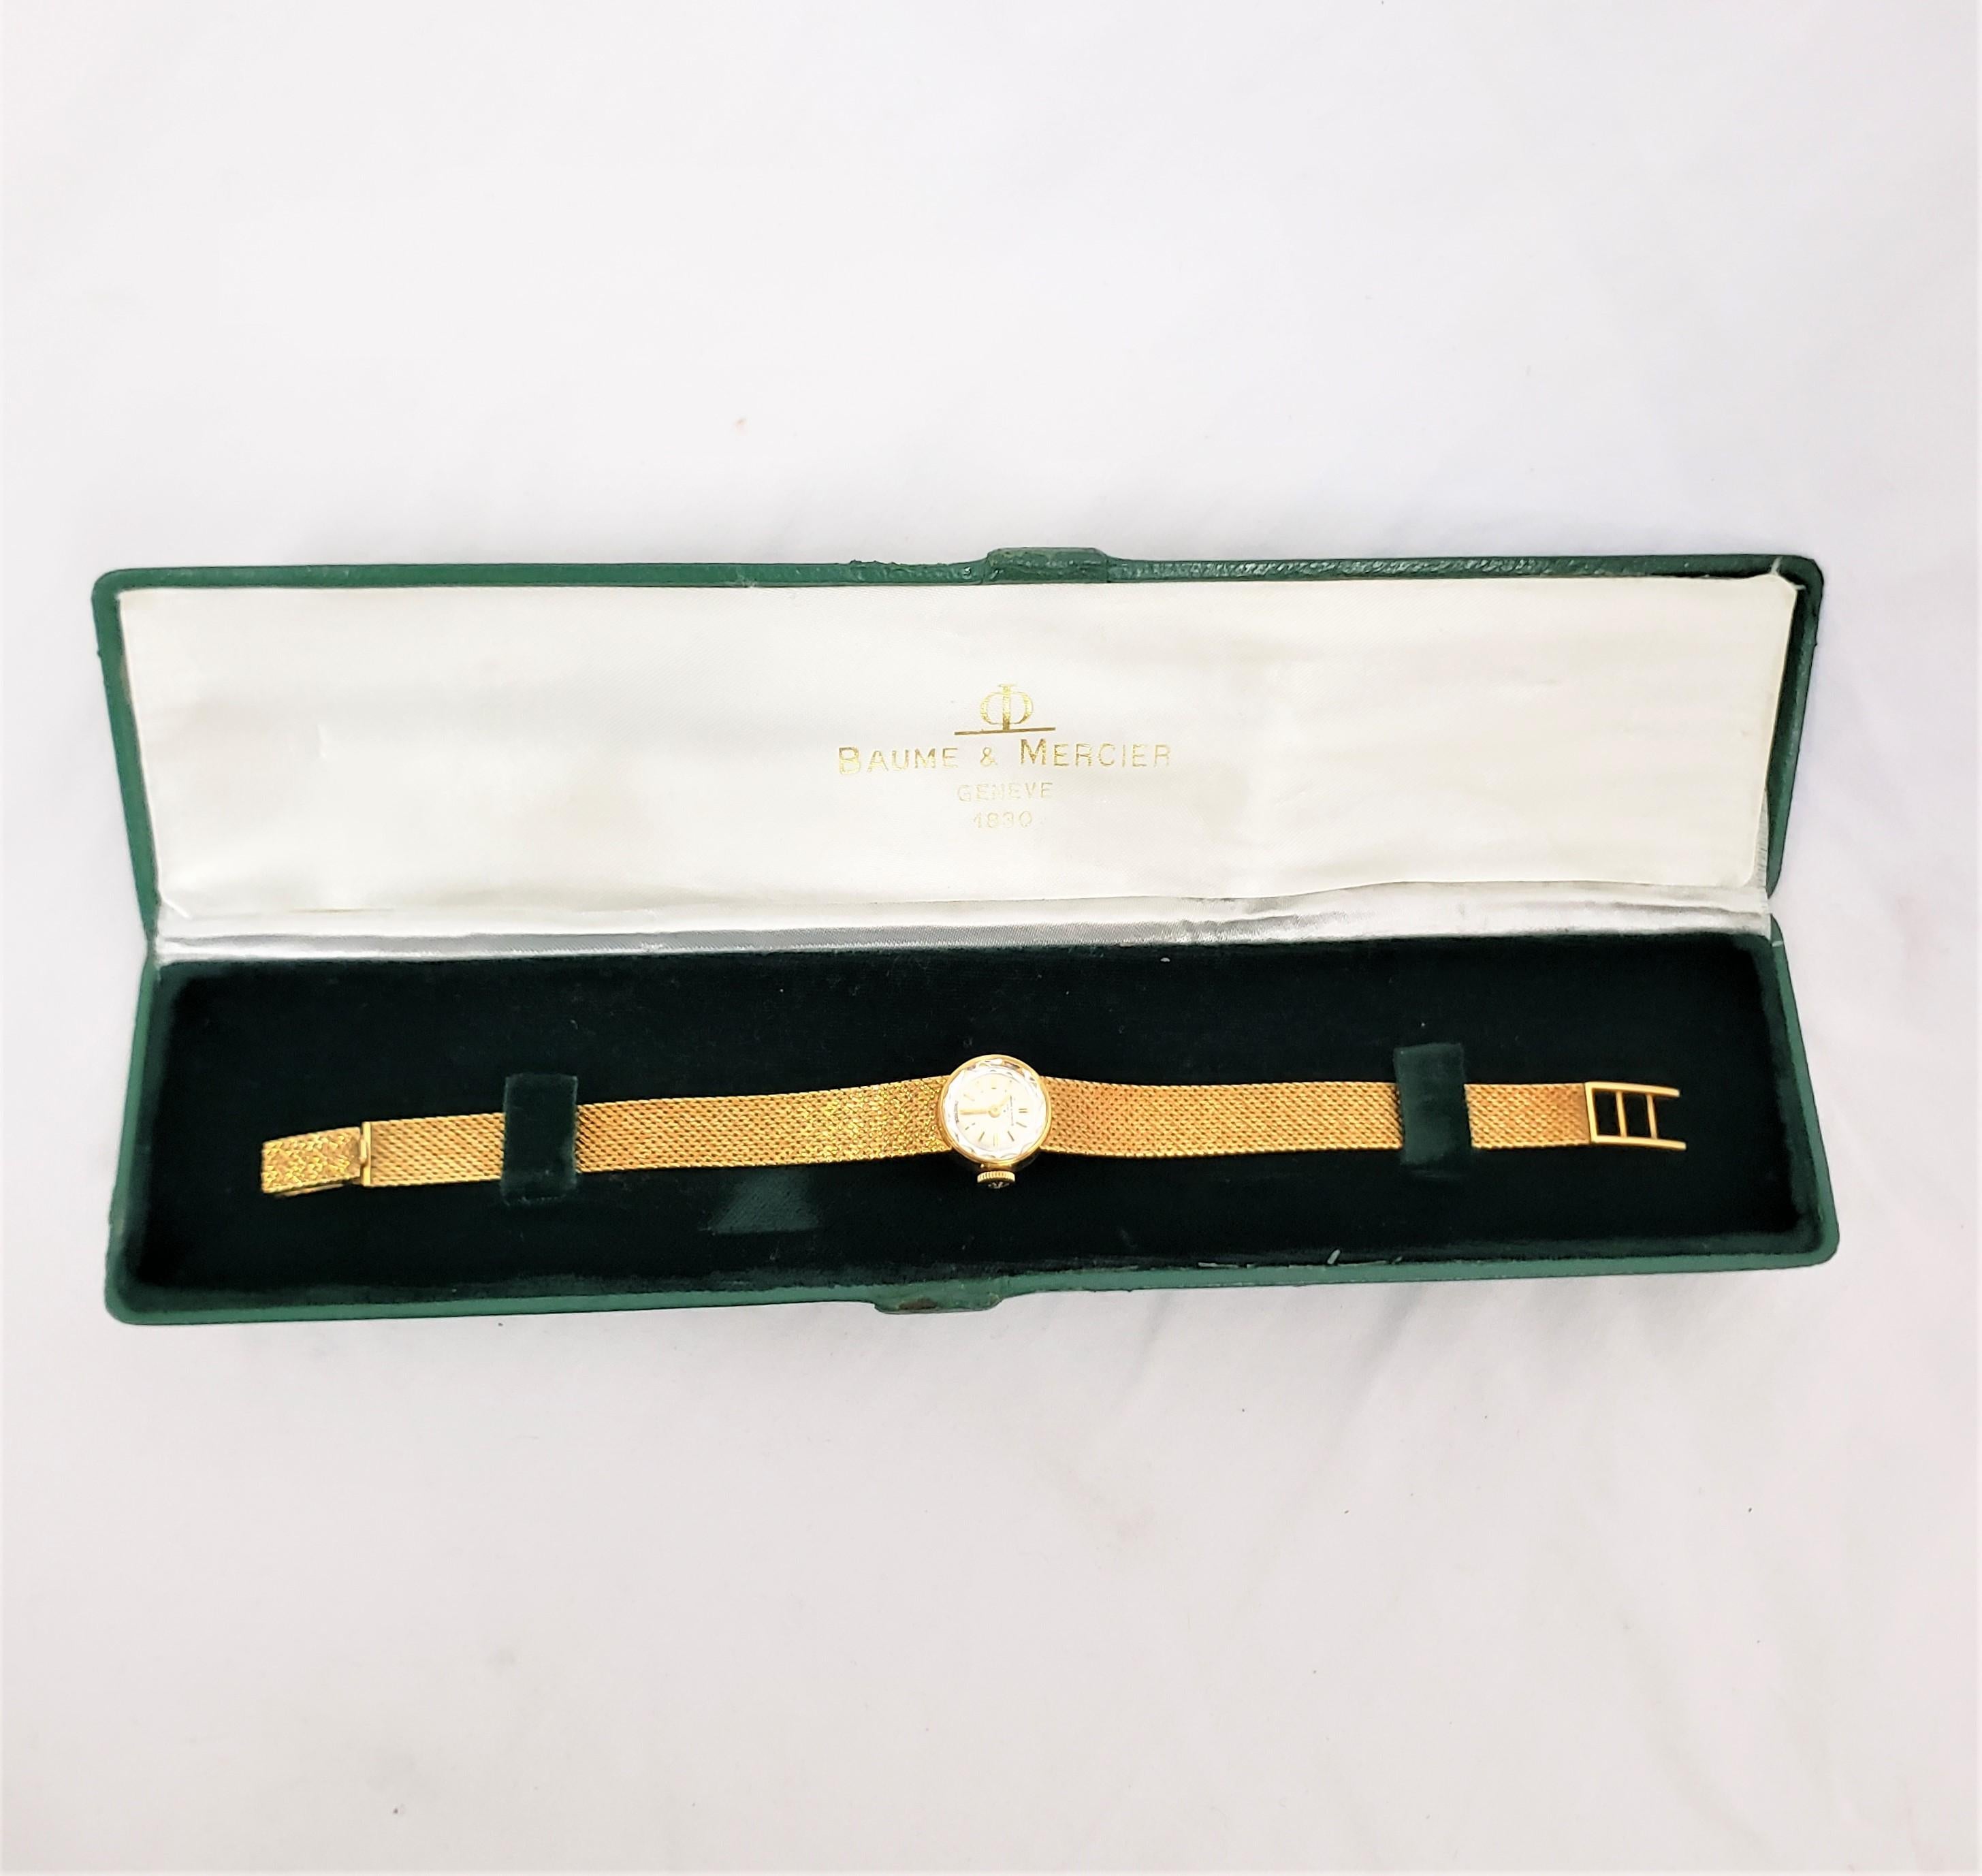 This antique ladies wristwatch was made by the well known Baume et Mercier of Switzerland in approximately 1920 in their period style. The watch and bracelet are composed of eighteen karat yellow gold. The watch face is done in a silver tone with a